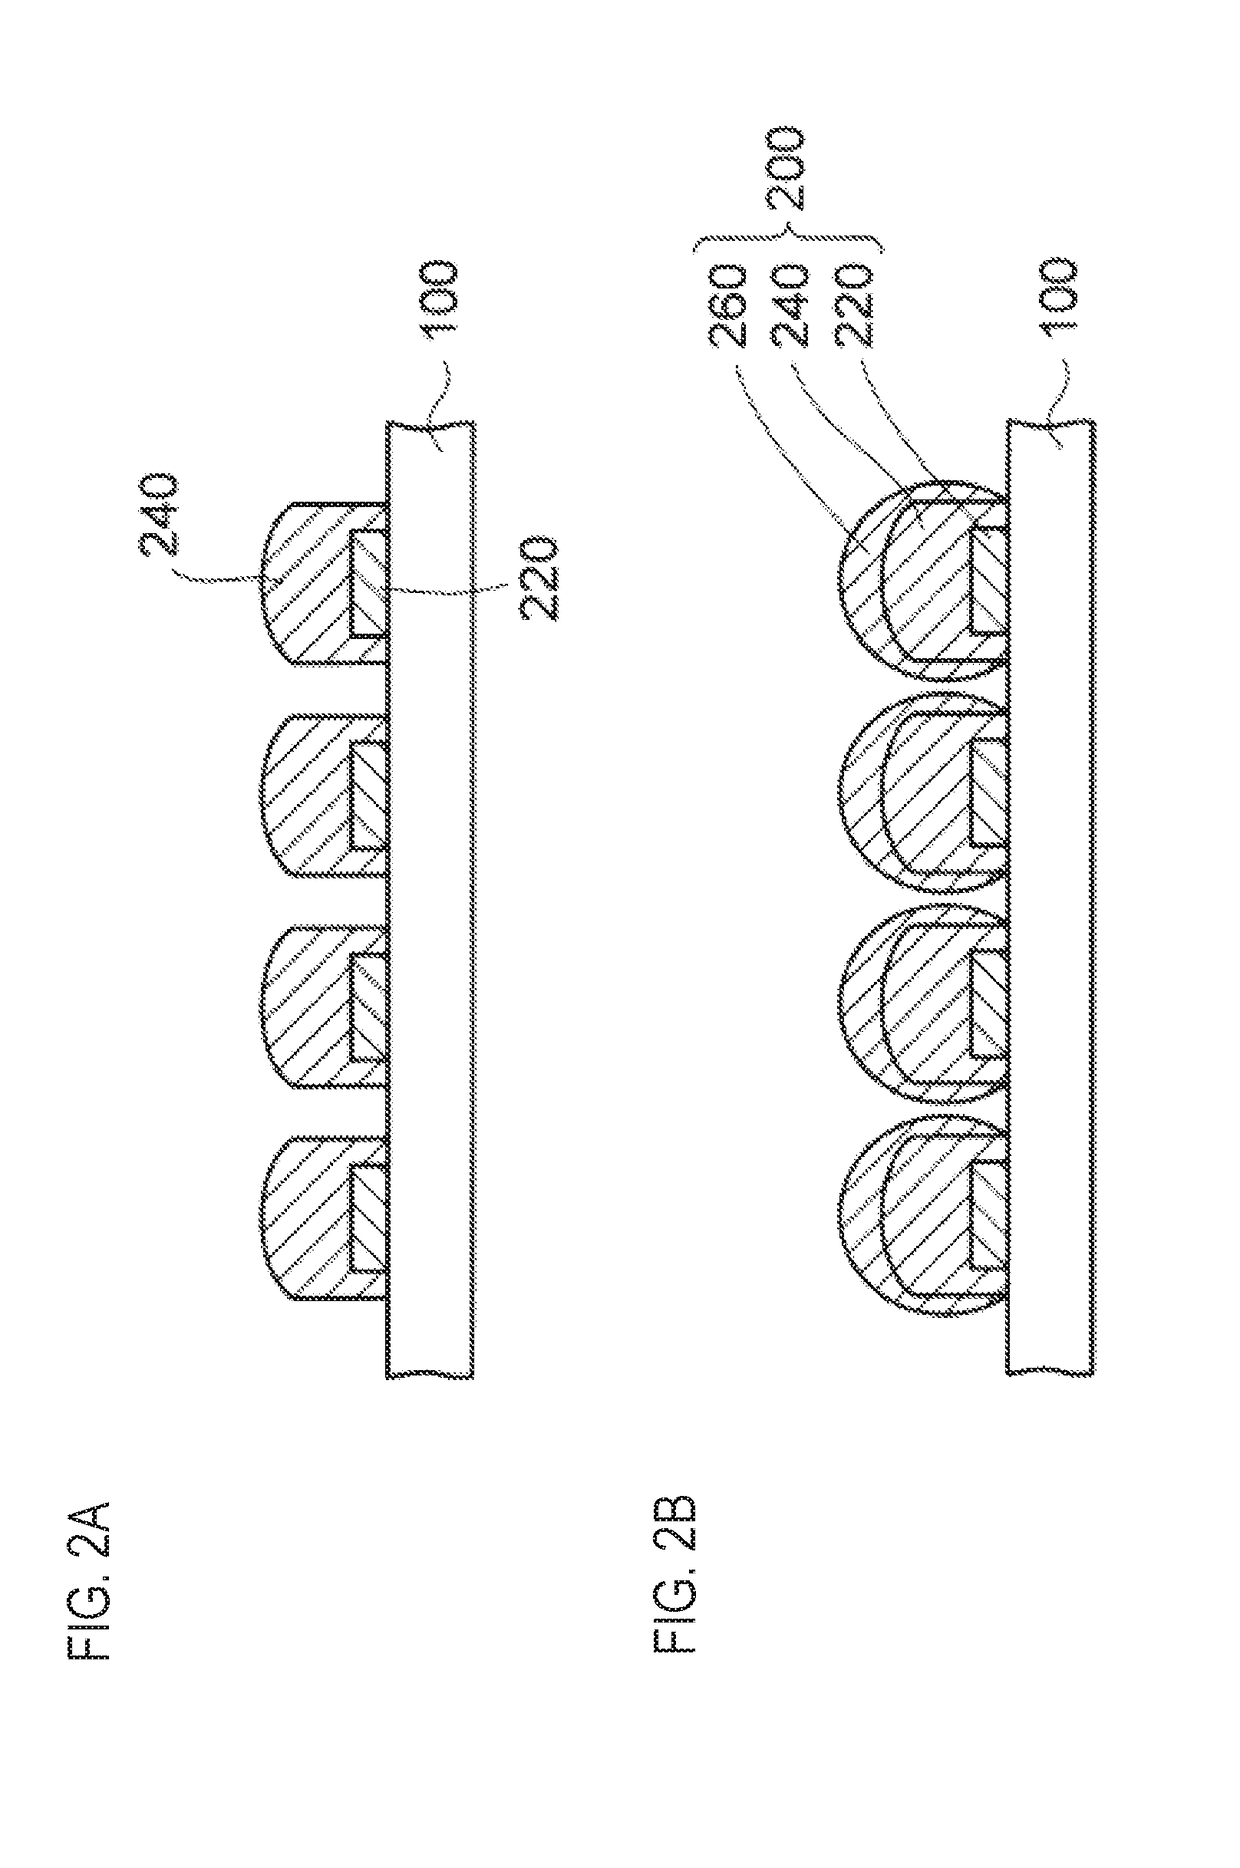 Inductor device